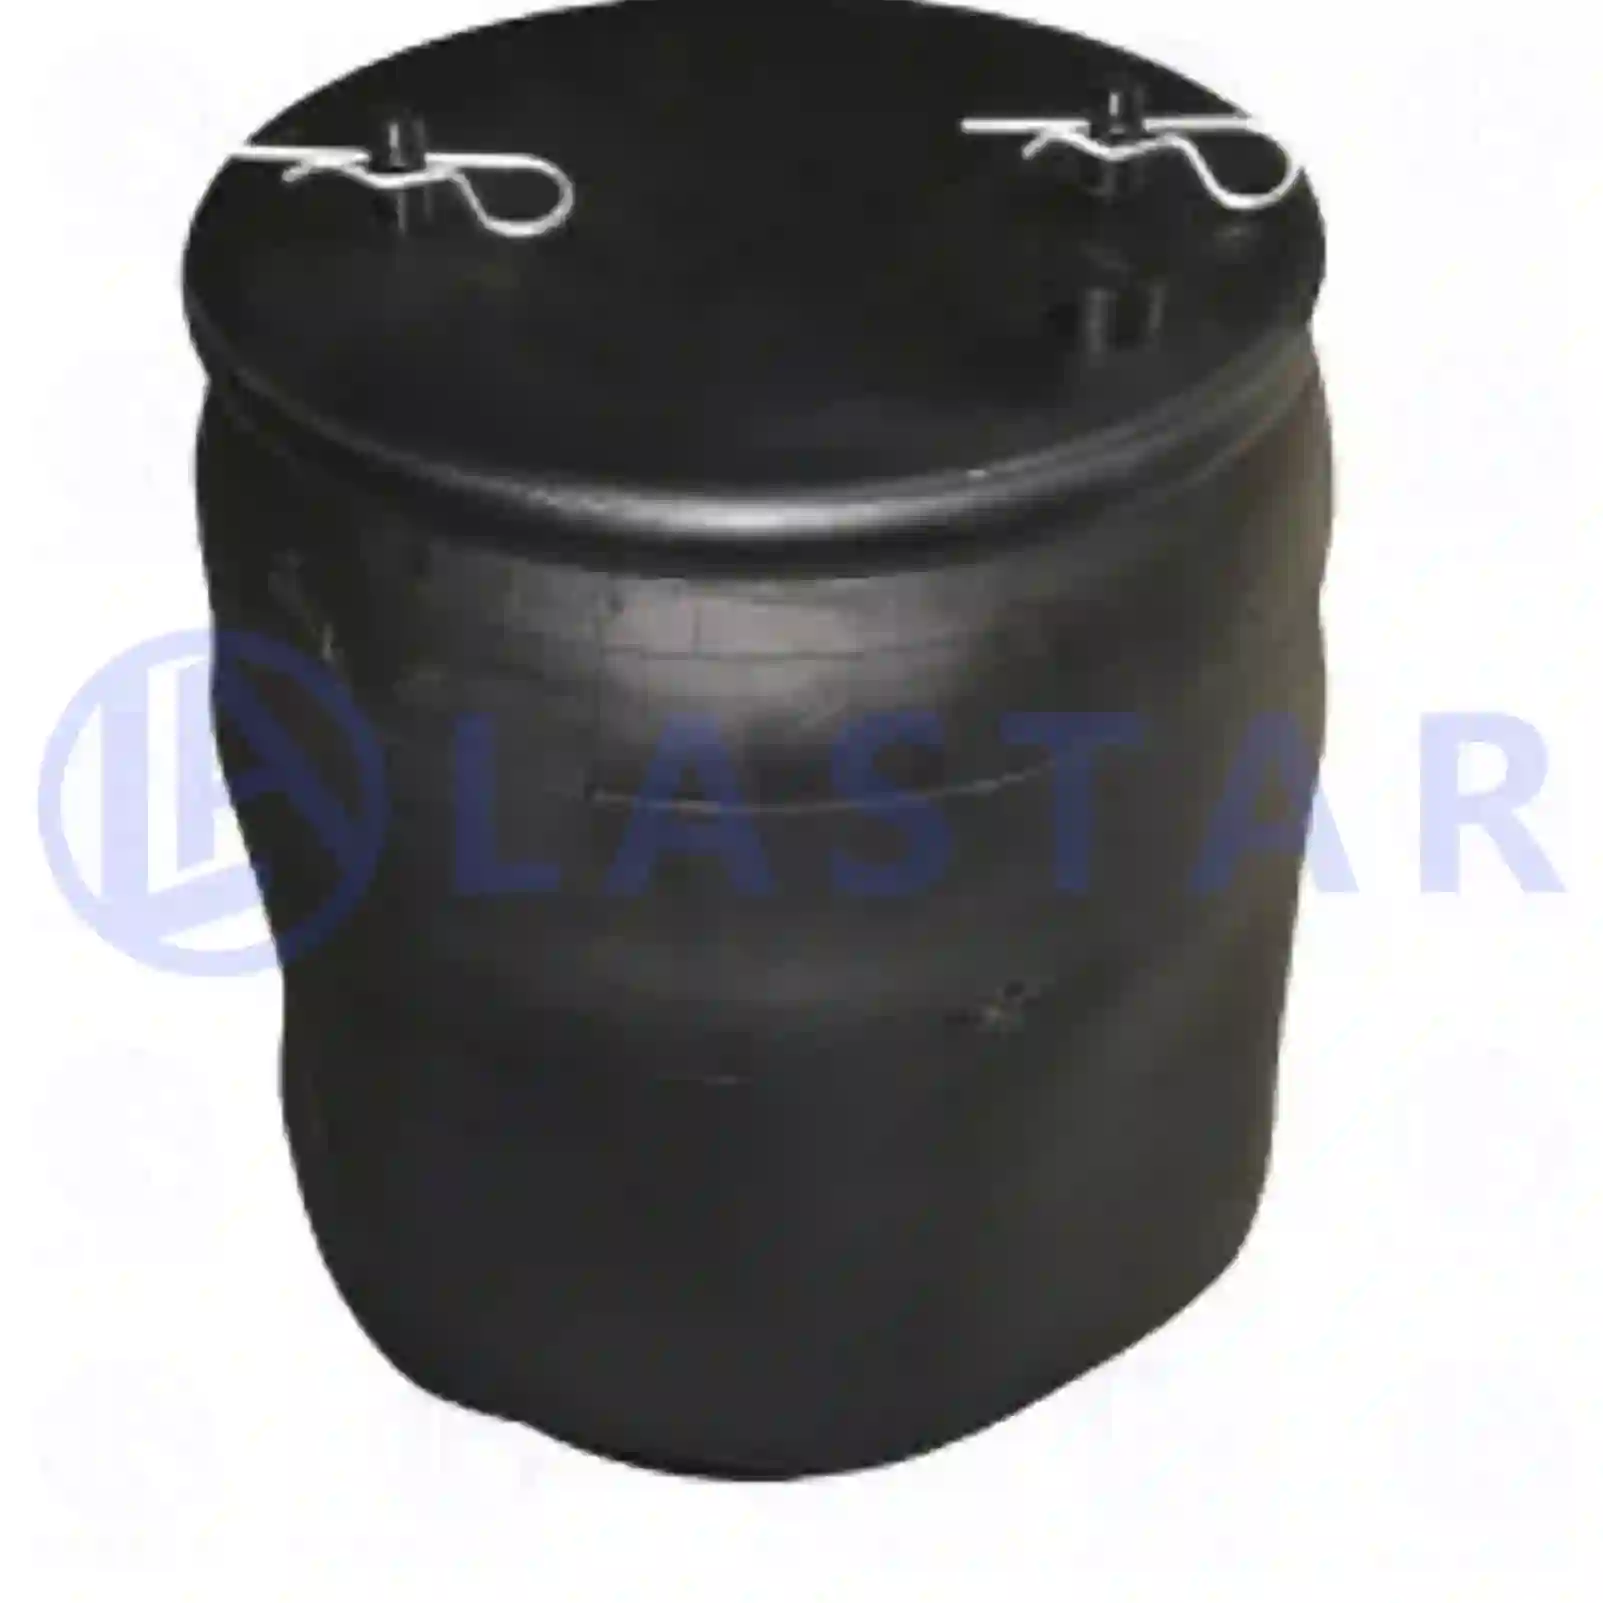 Air spring, with steel piston, 77730142, 2024288, 2024291, ZG40747-0008, ||  77730142 Lastar Spare Part | Truck Spare Parts, Auotomotive Spare Parts Air spring, with steel piston, 77730142, 2024288, 2024291, ZG40747-0008, ||  77730142 Lastar Spare Part | Truck Spare Parts, Auotomotive Spare Parts